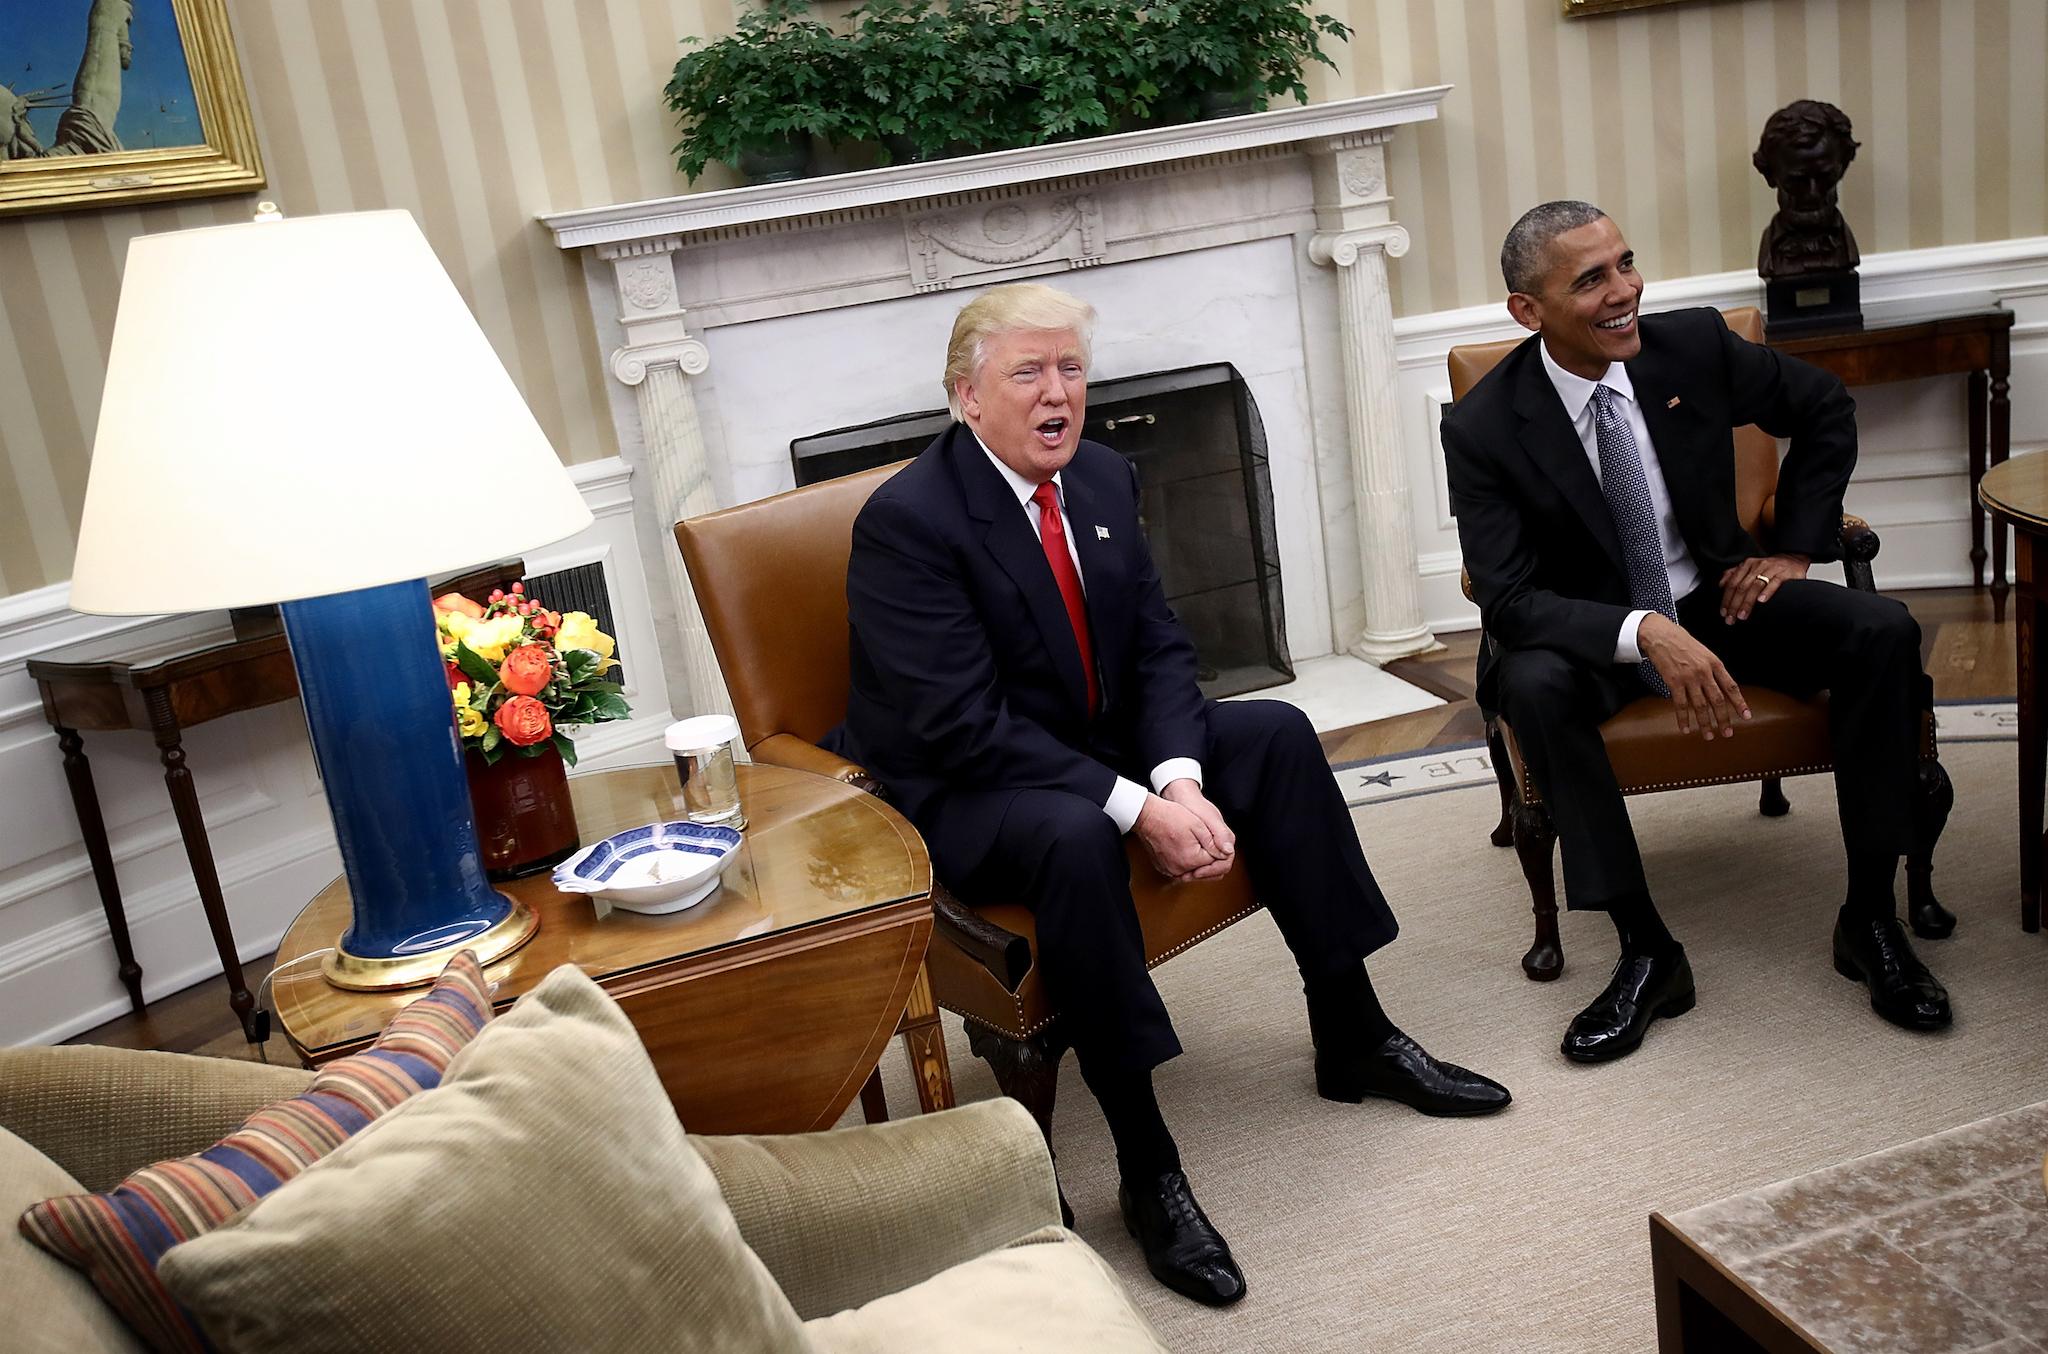 Donald Trump and Barack Obama enjoy a light-hearted exchange with journalists in the White House in December